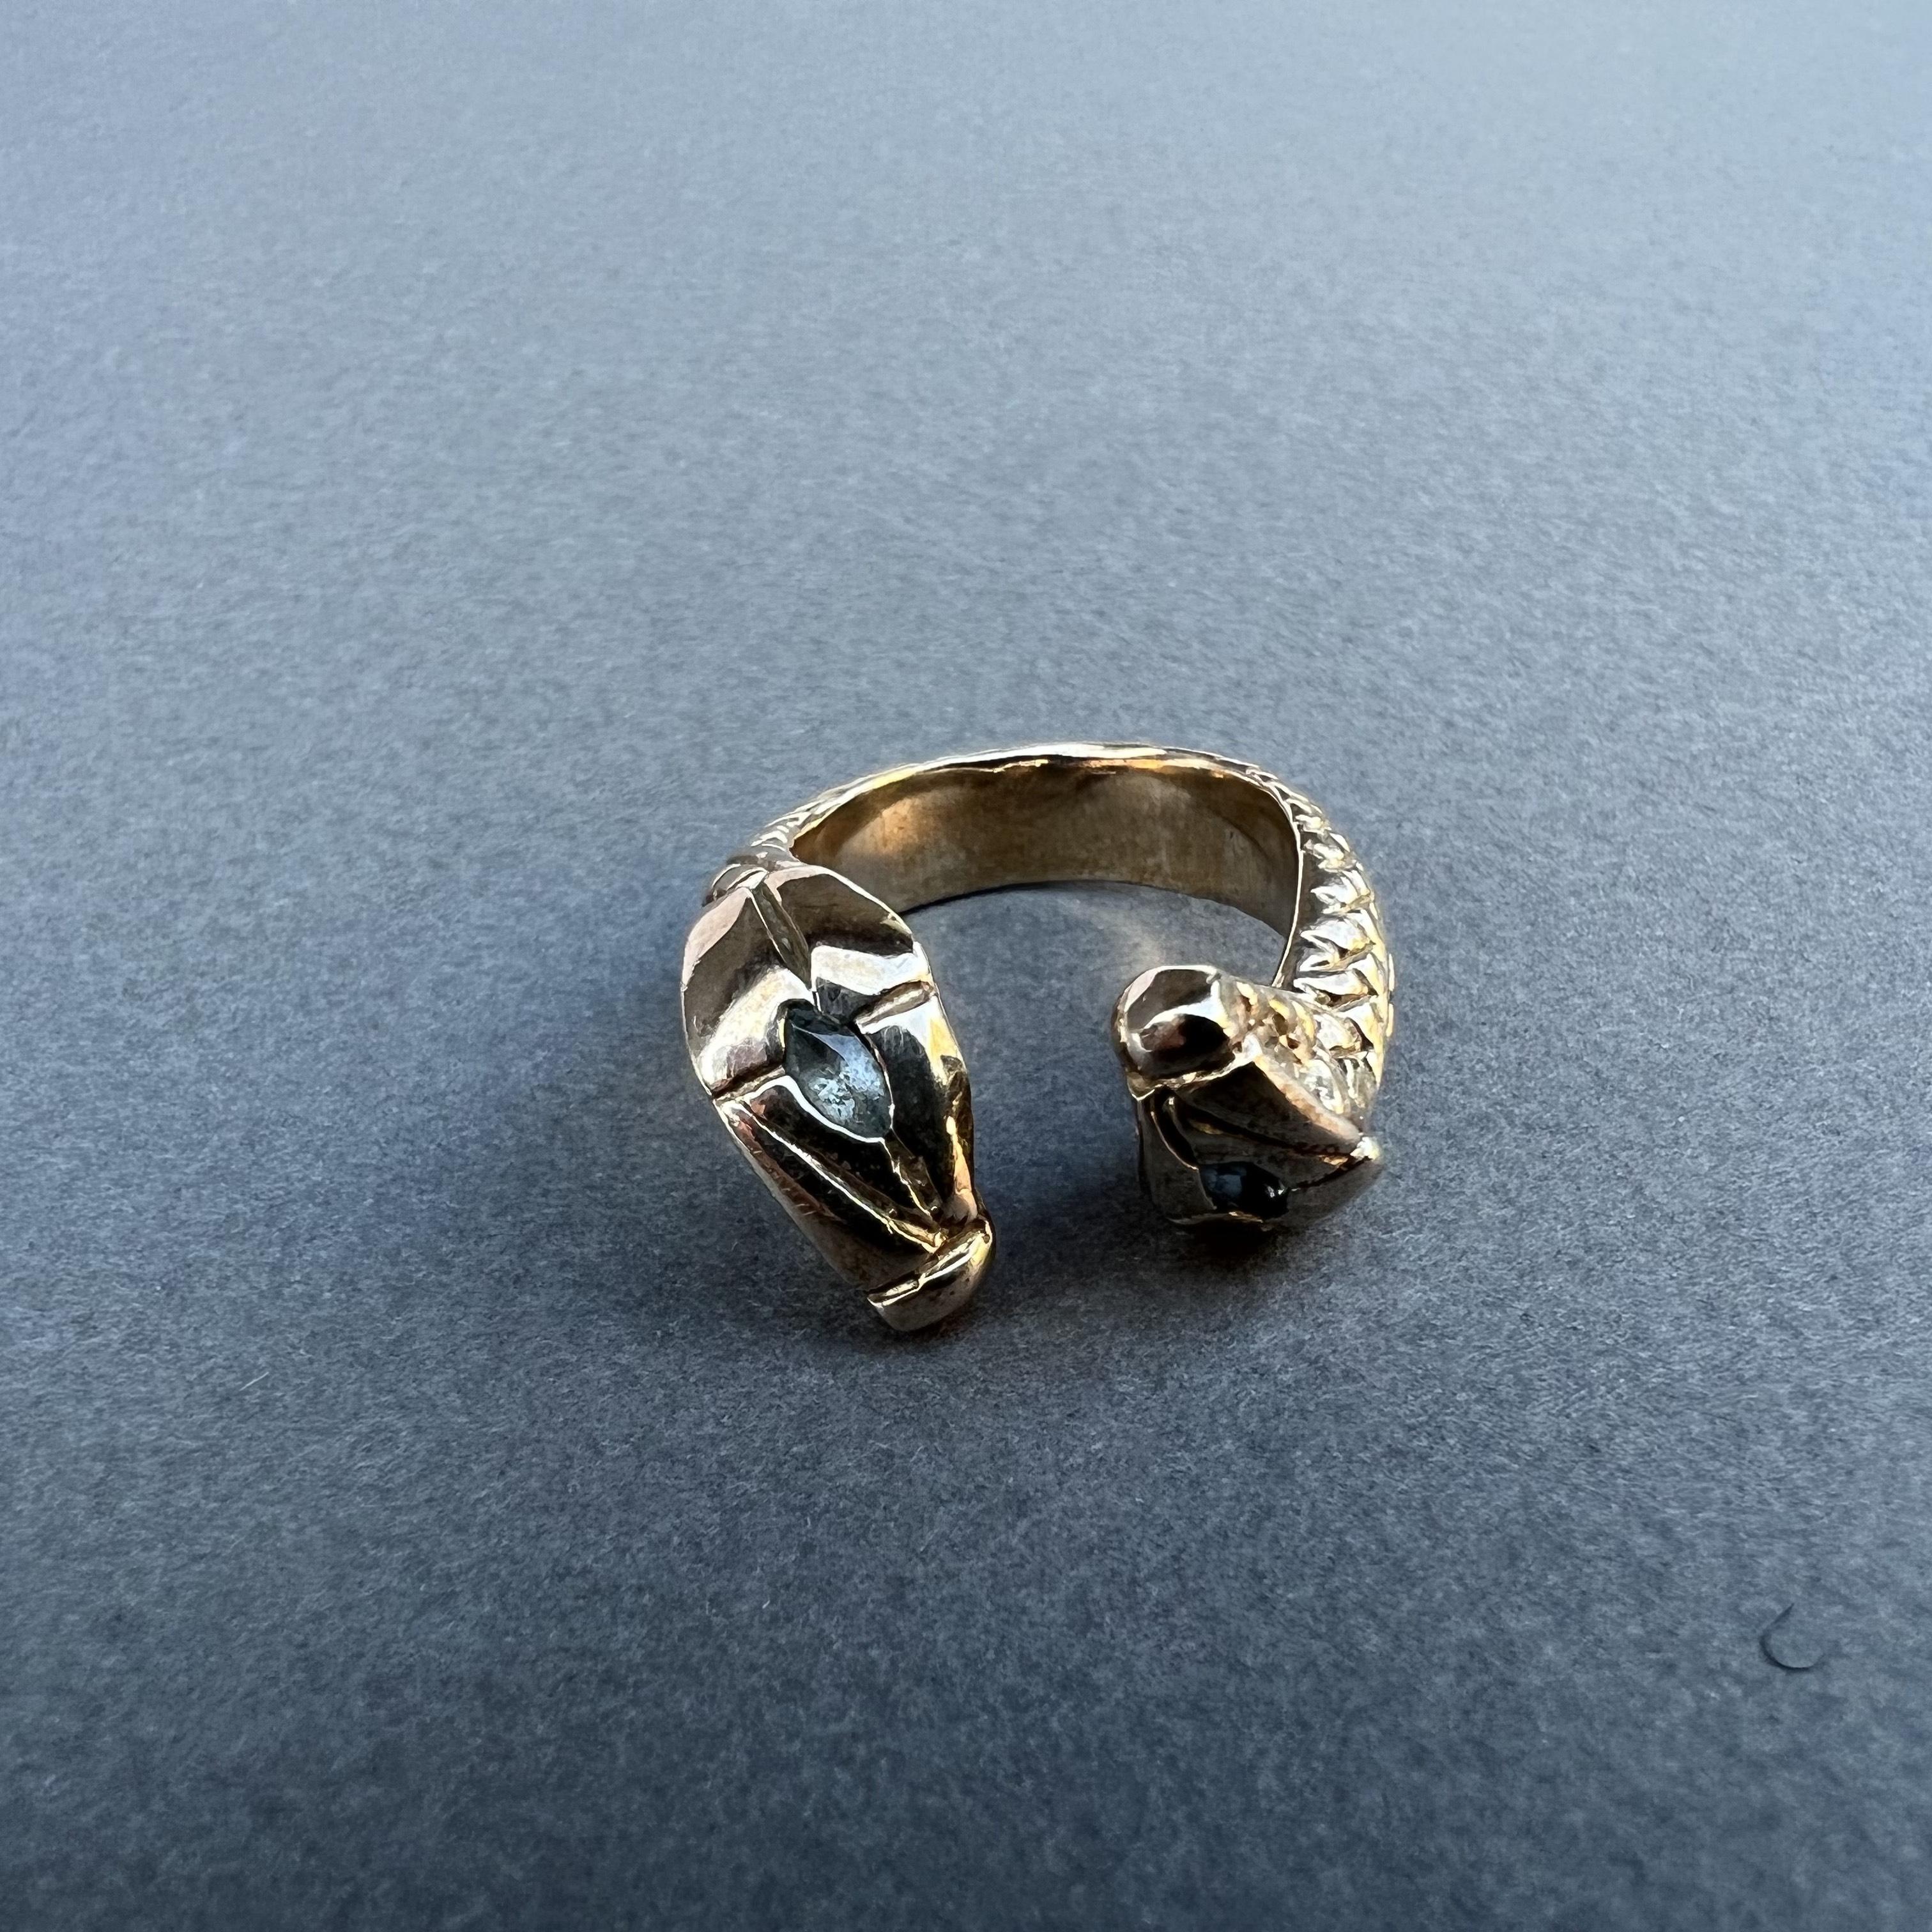 Aquamarine Double Snake Head Ring Cocktail Bronze Adjustable J Dauphin For Sale 4